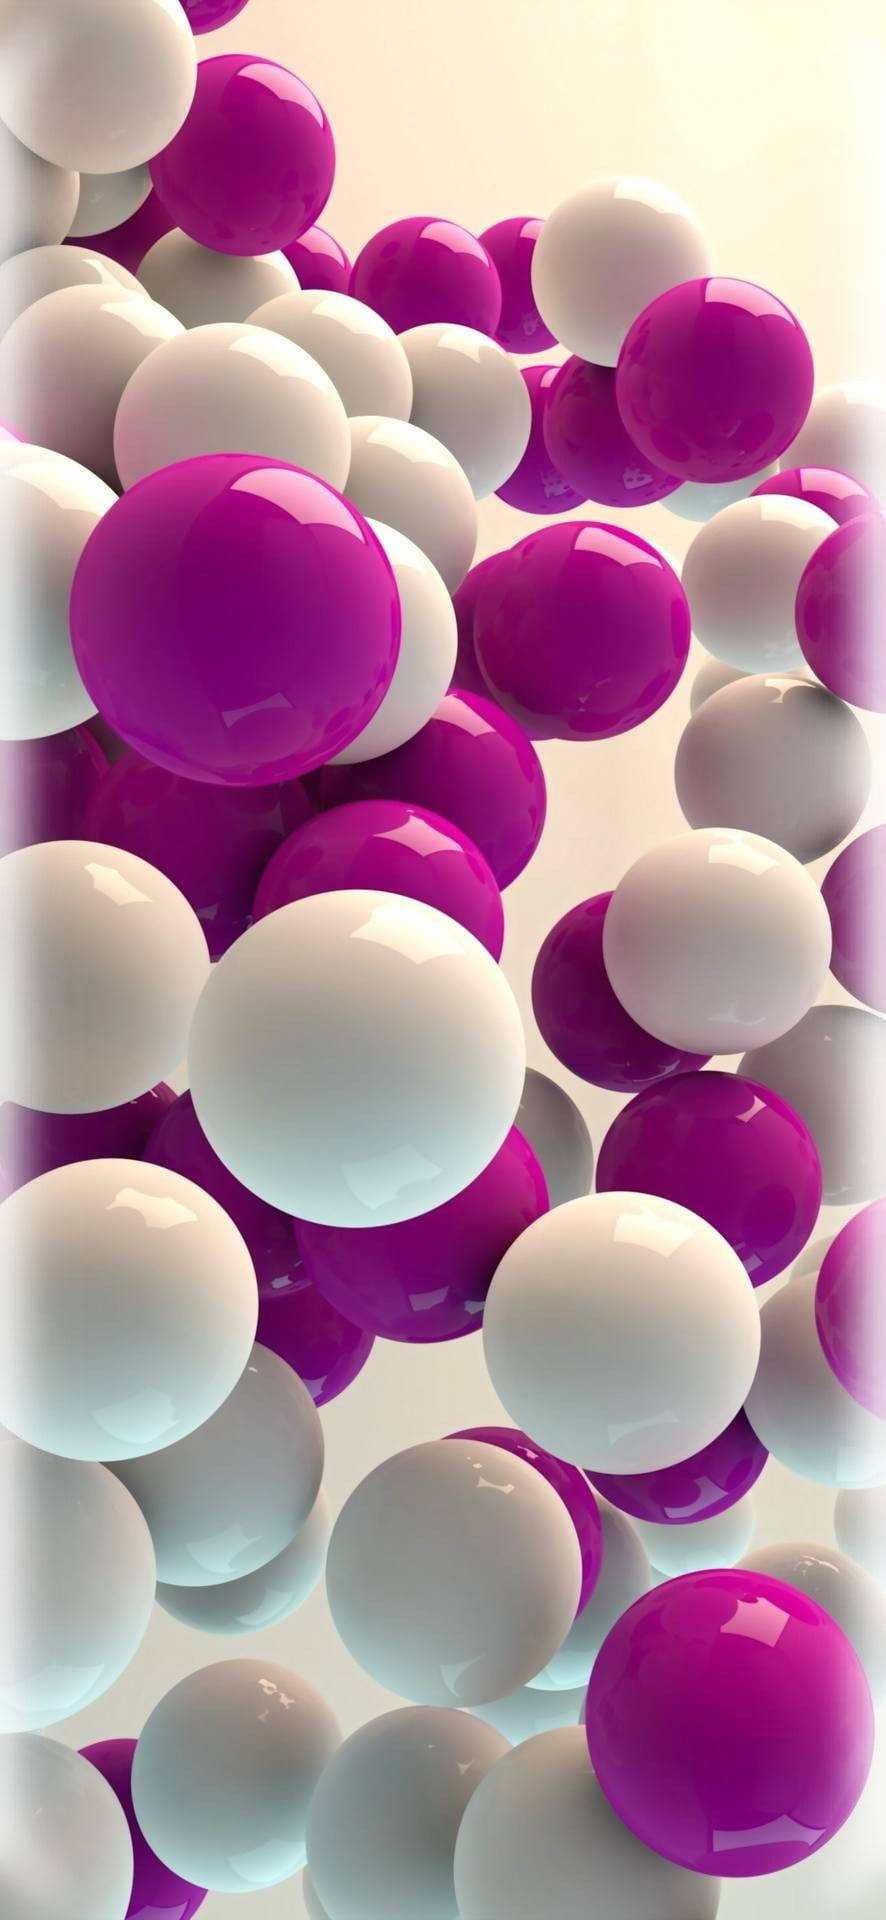 Samsung Galaxy S20 Floating In A Mesmerizing Background Of White And Purple Spheres